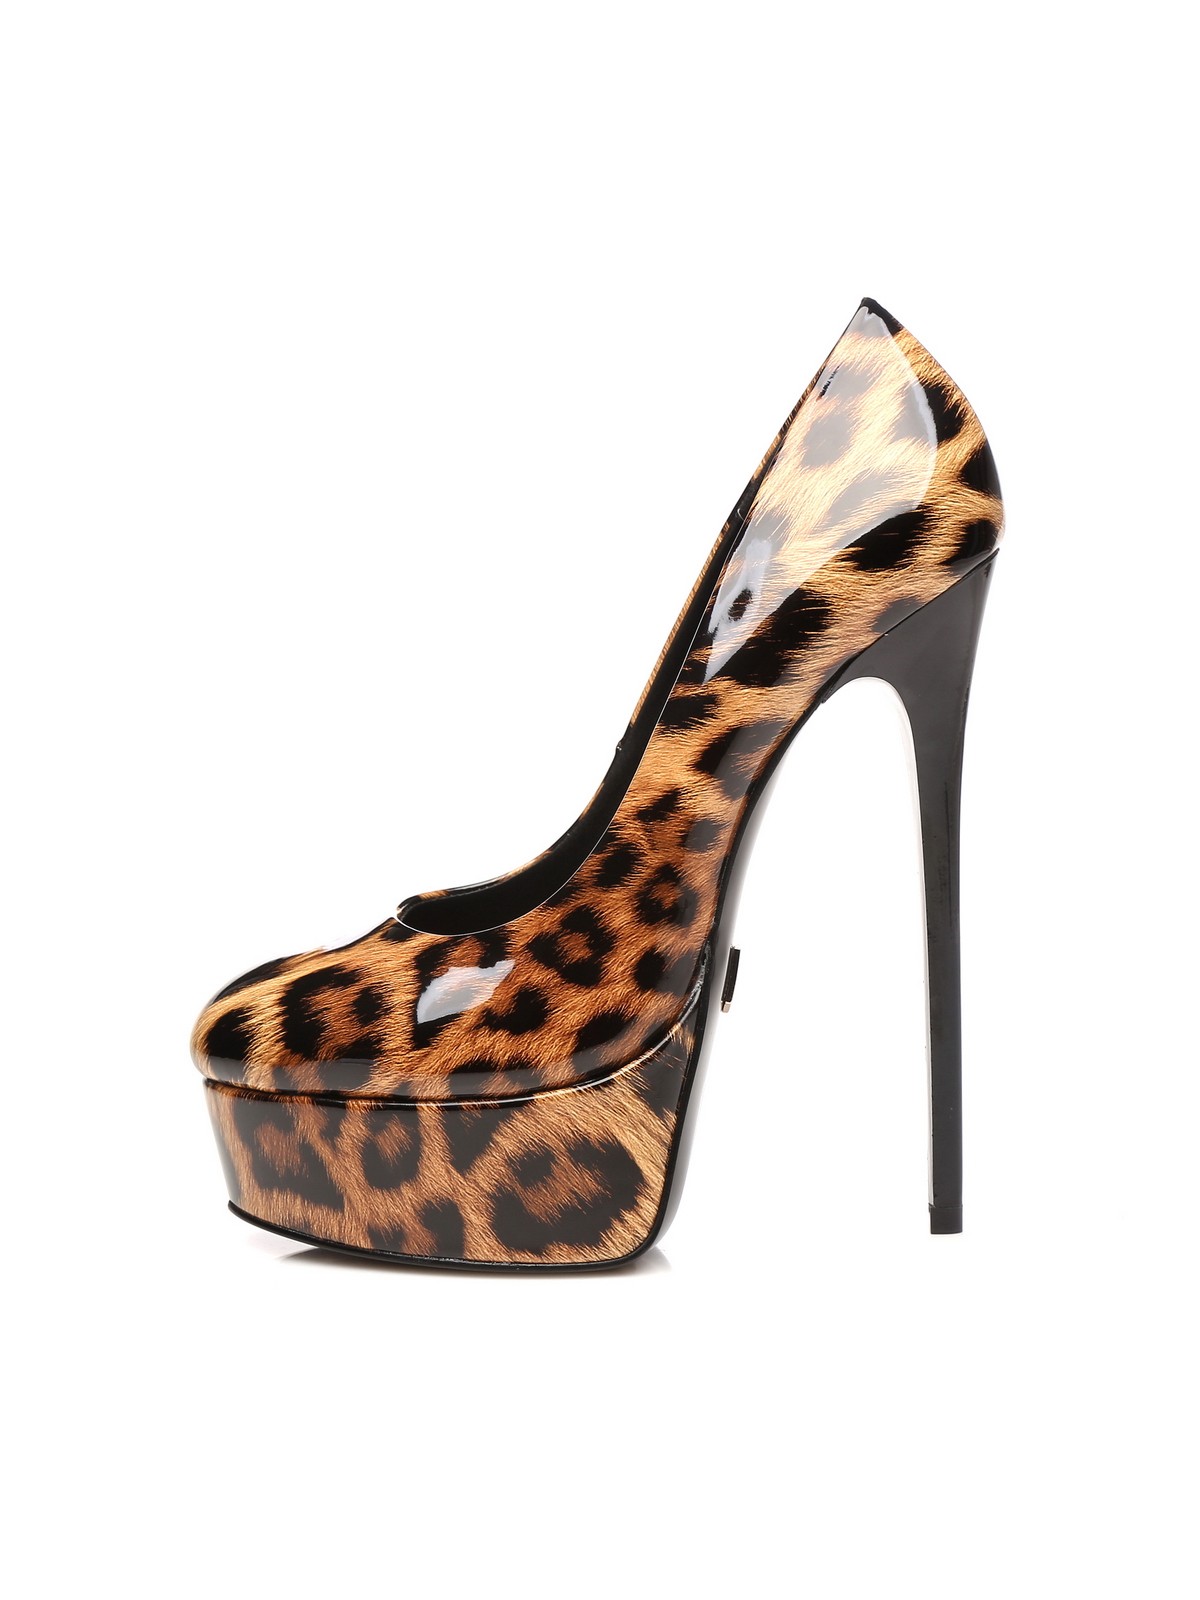 Giaro high heel pumps with leopard pattern